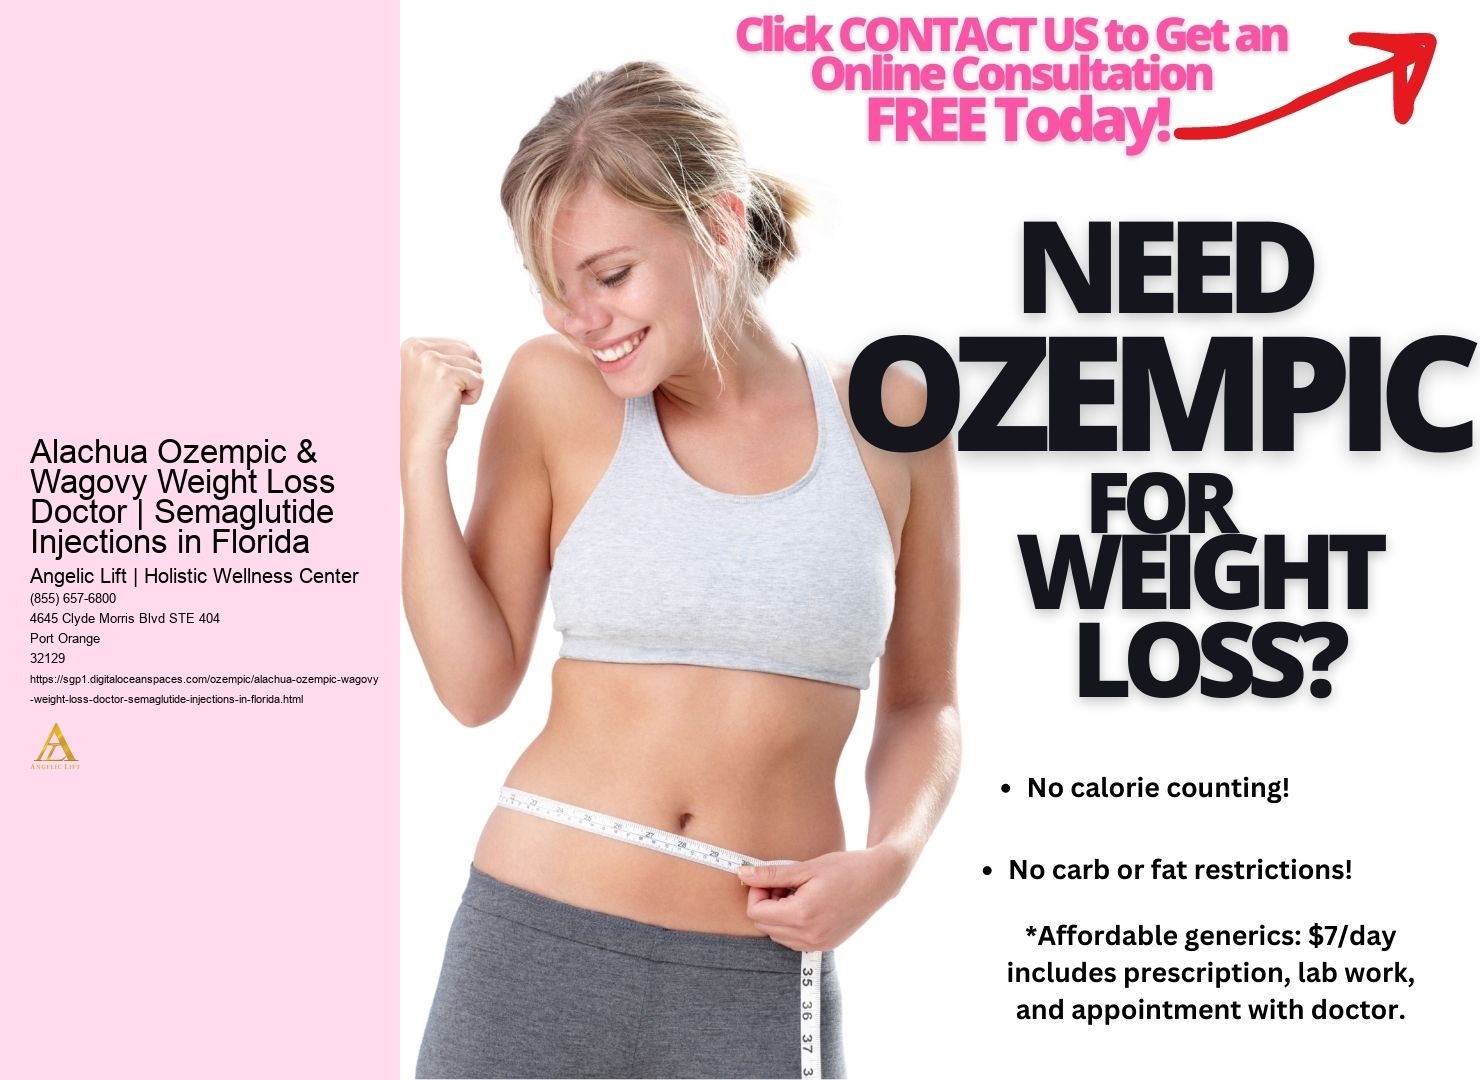 Alachua Ozempic & Wagovy Weight Loss Doctor | Semaglutide Injections in Florida